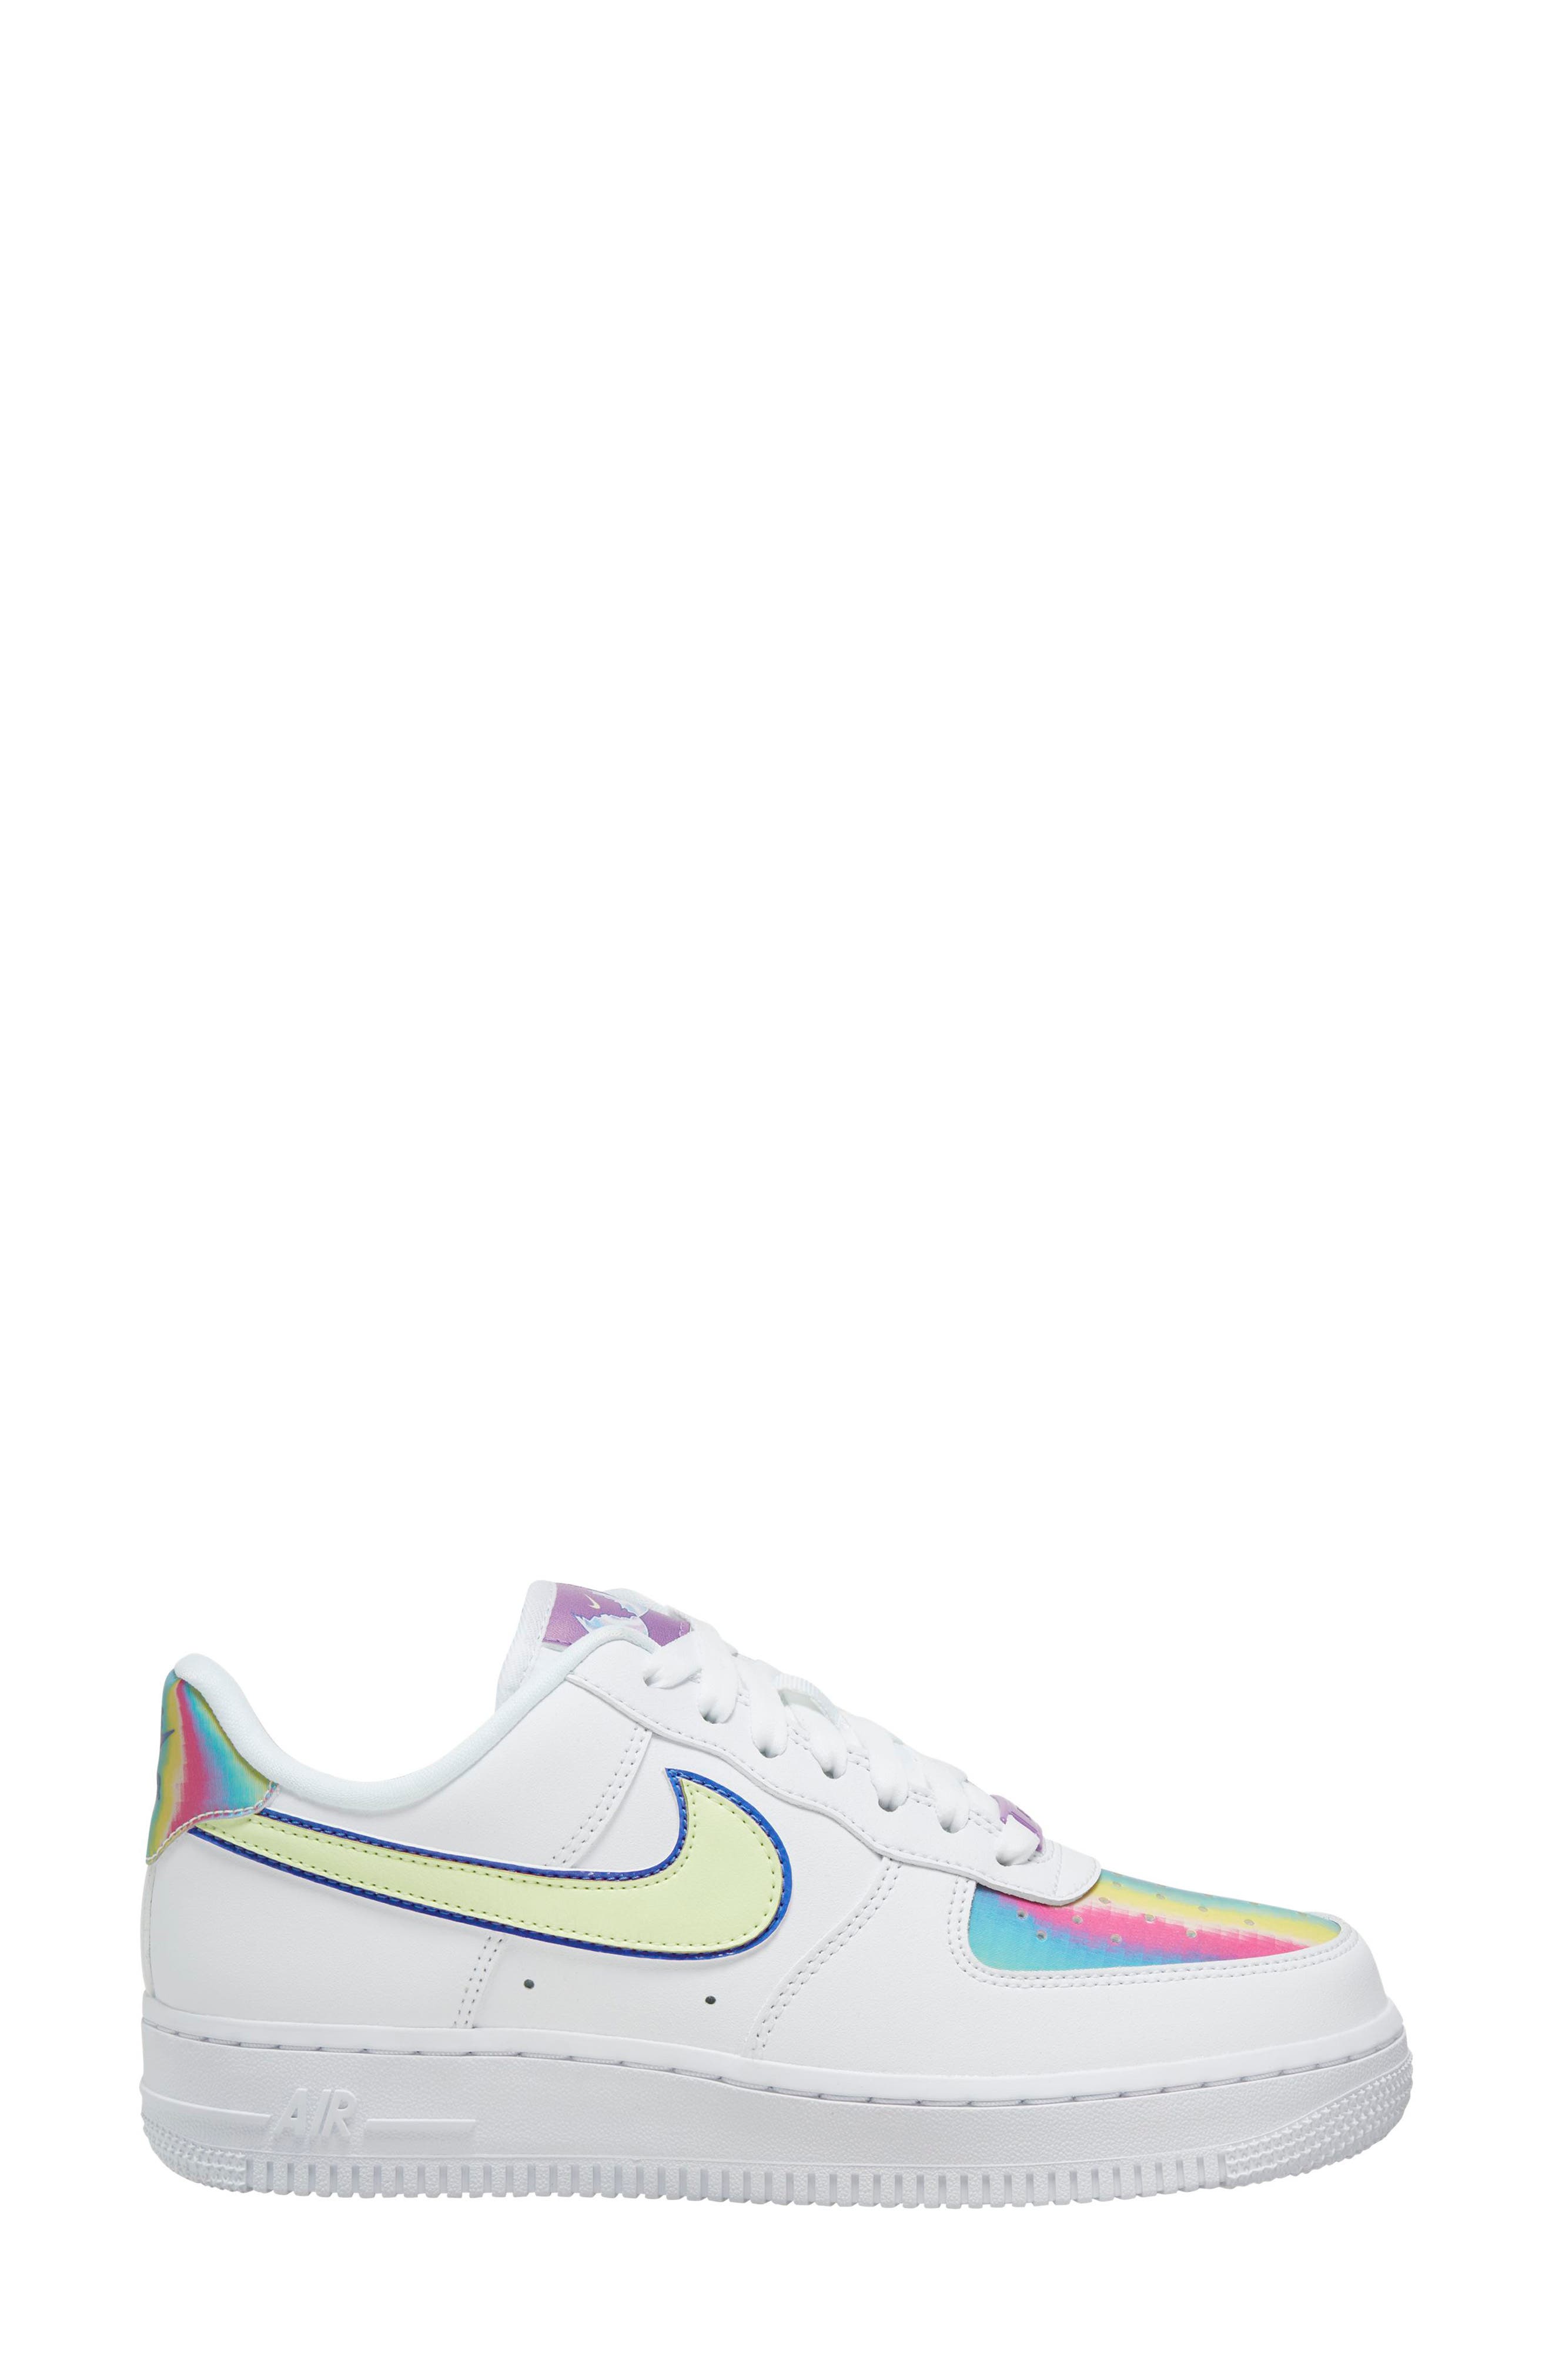 nike air force 1 size 8 womens